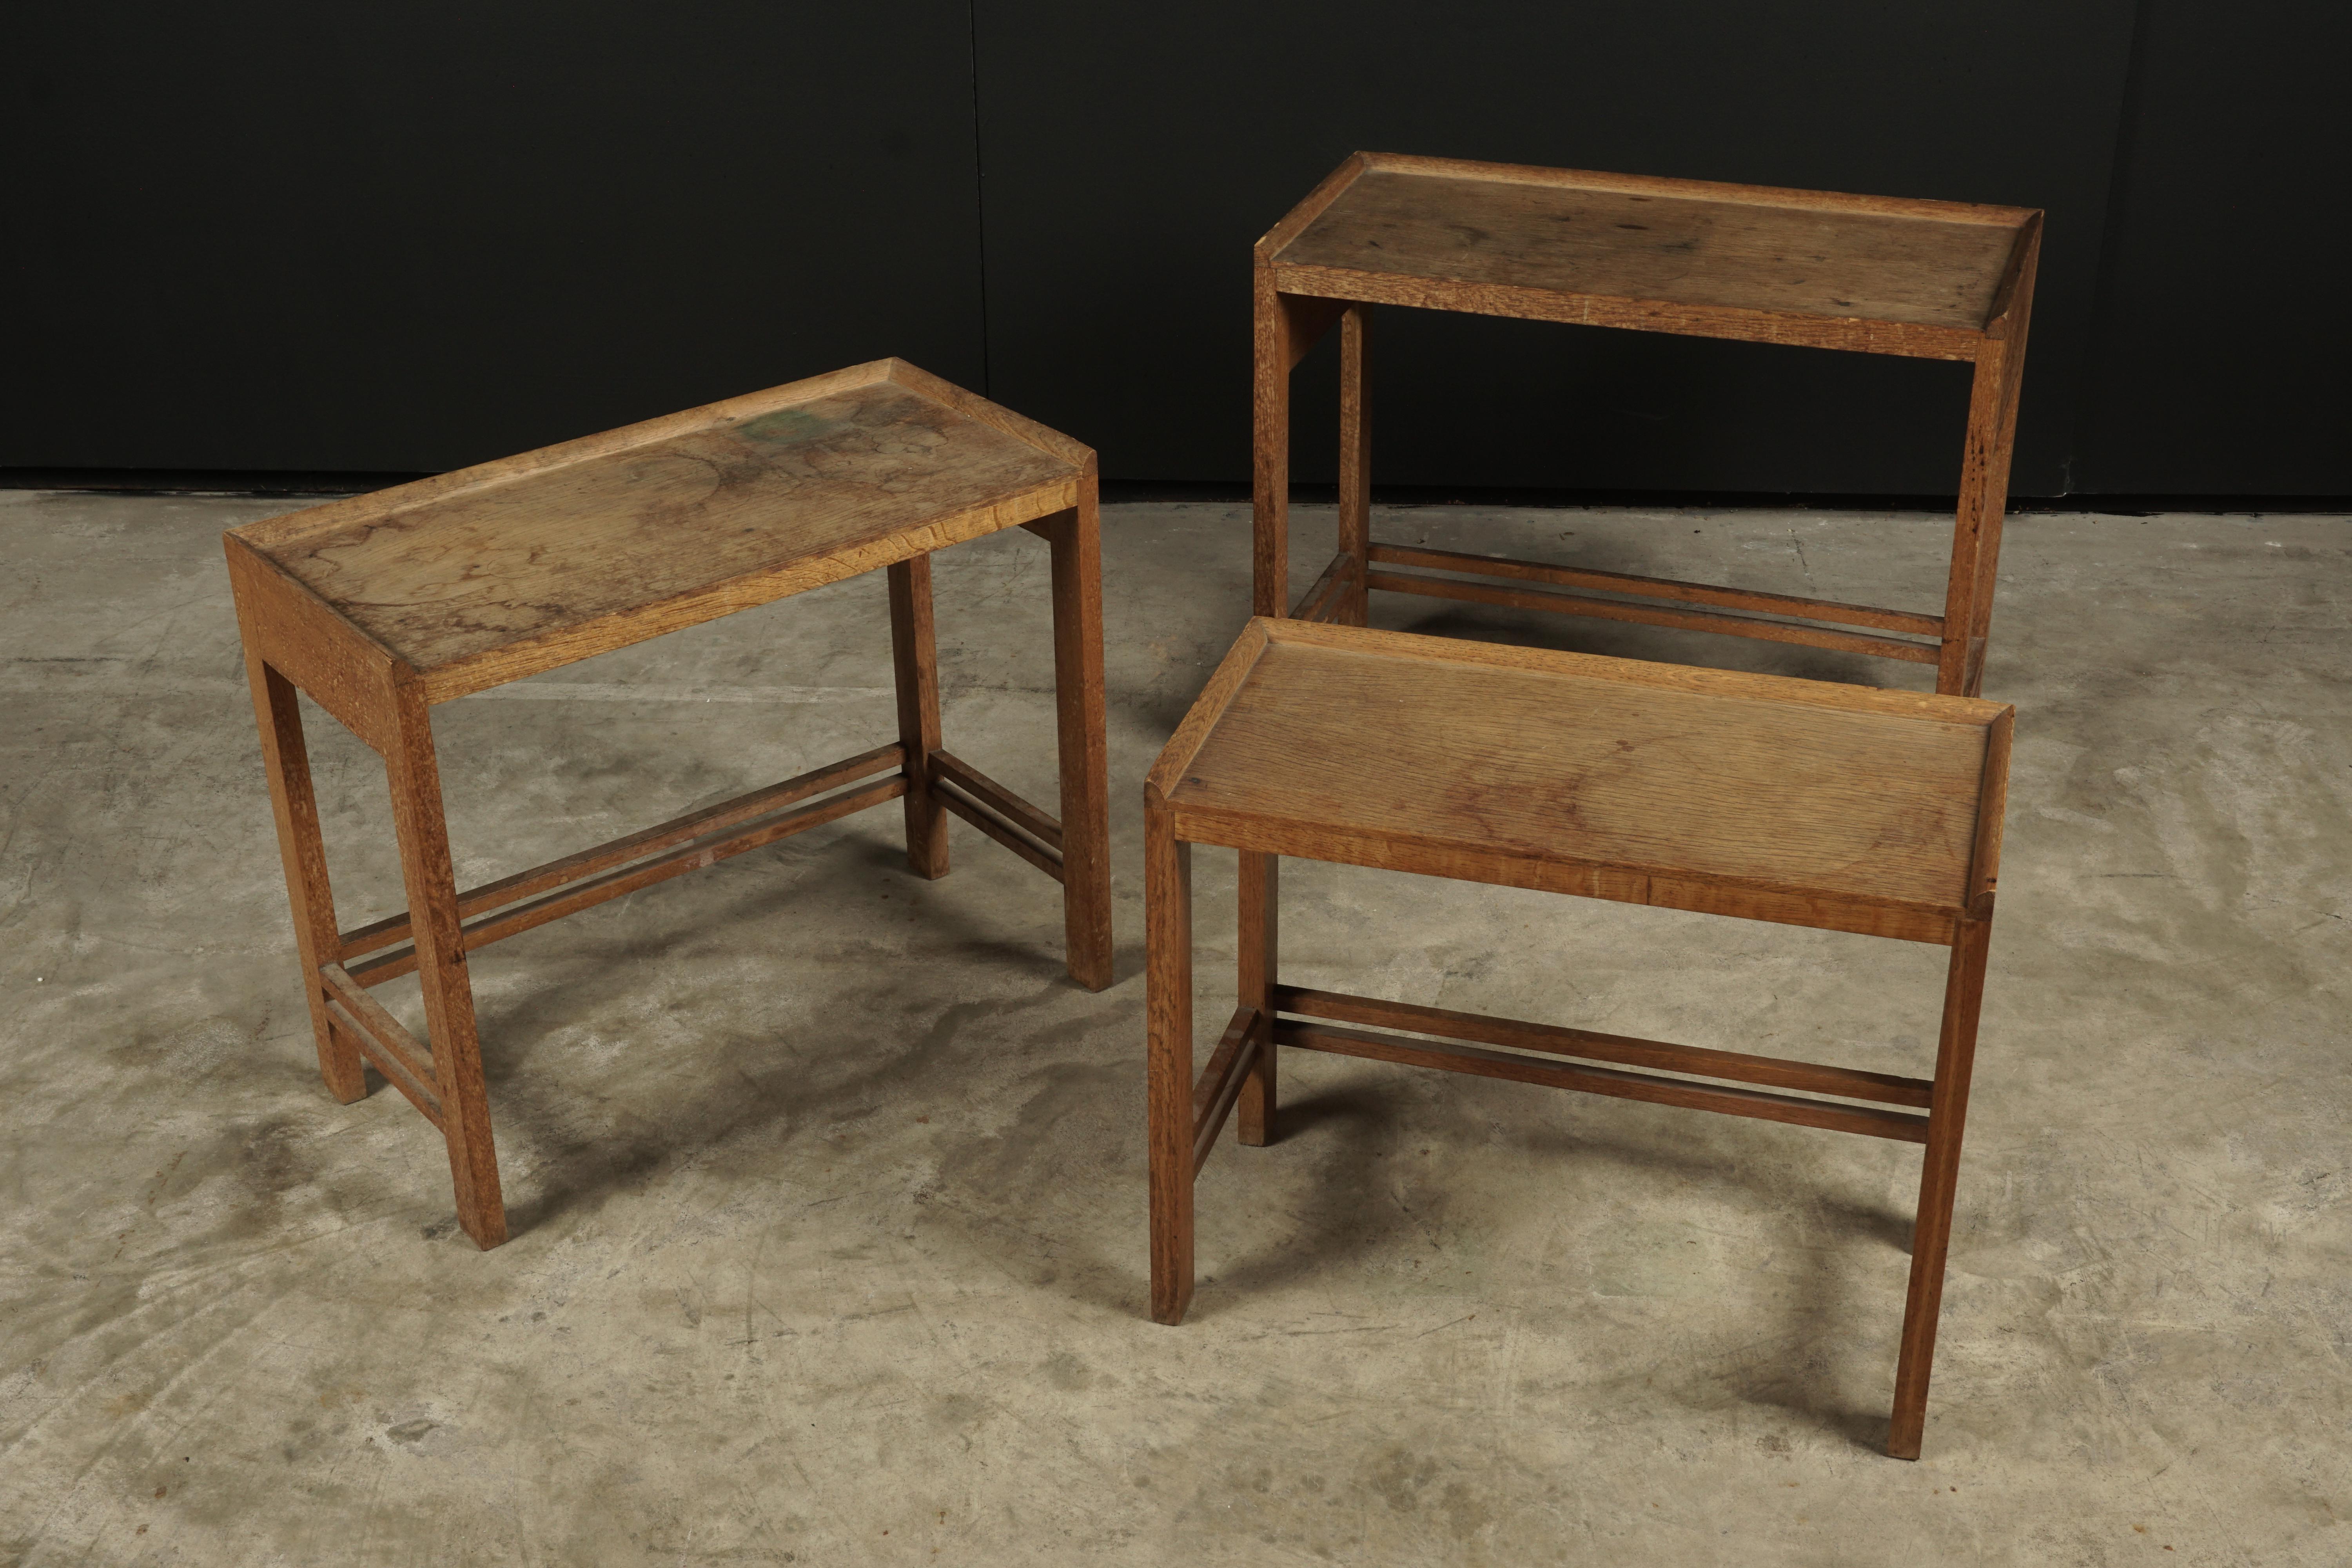 European Set of Three Midcentury Nesting Tables from France, circa 1950